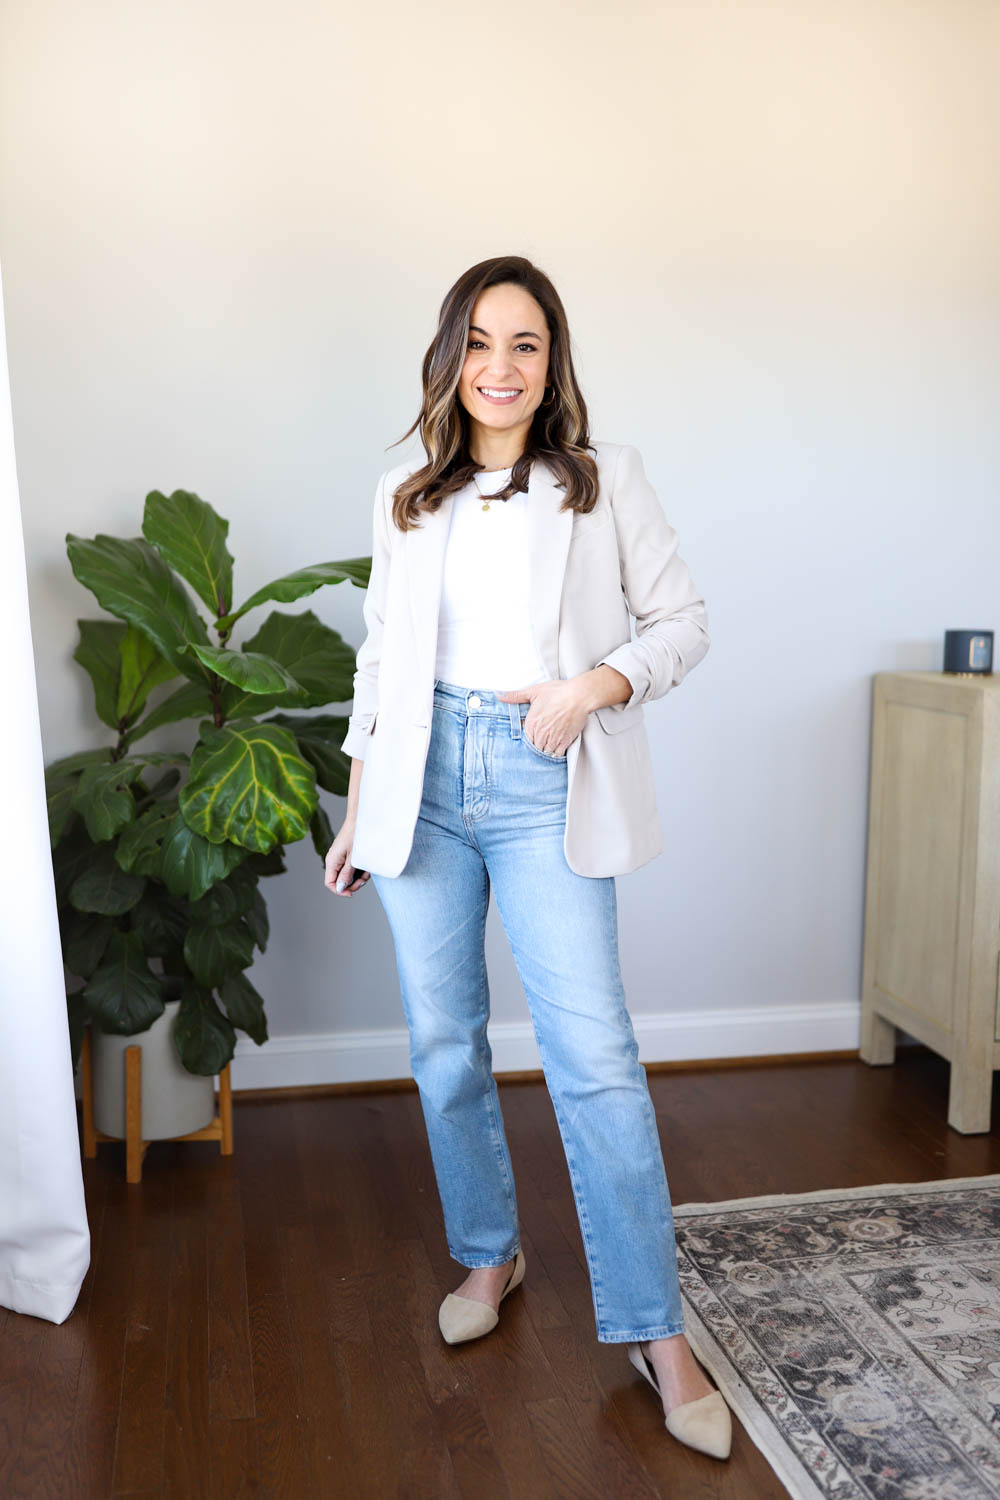 How to Wear Wide Leg Pants if You Are Short